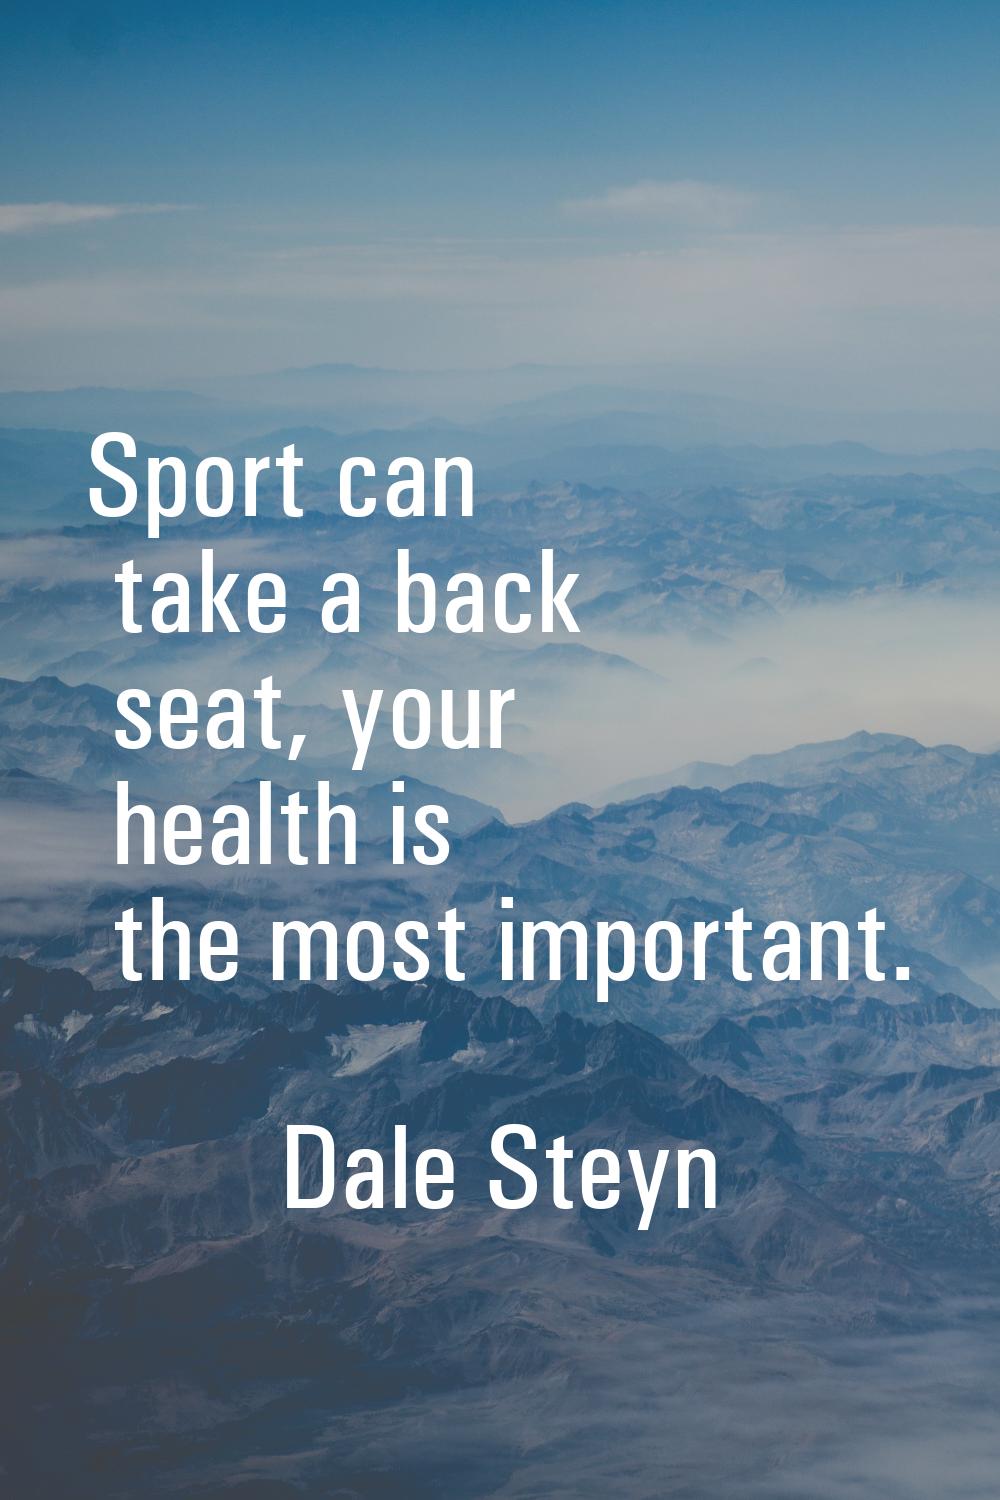 Sport can take a back seat, your health is the most important.